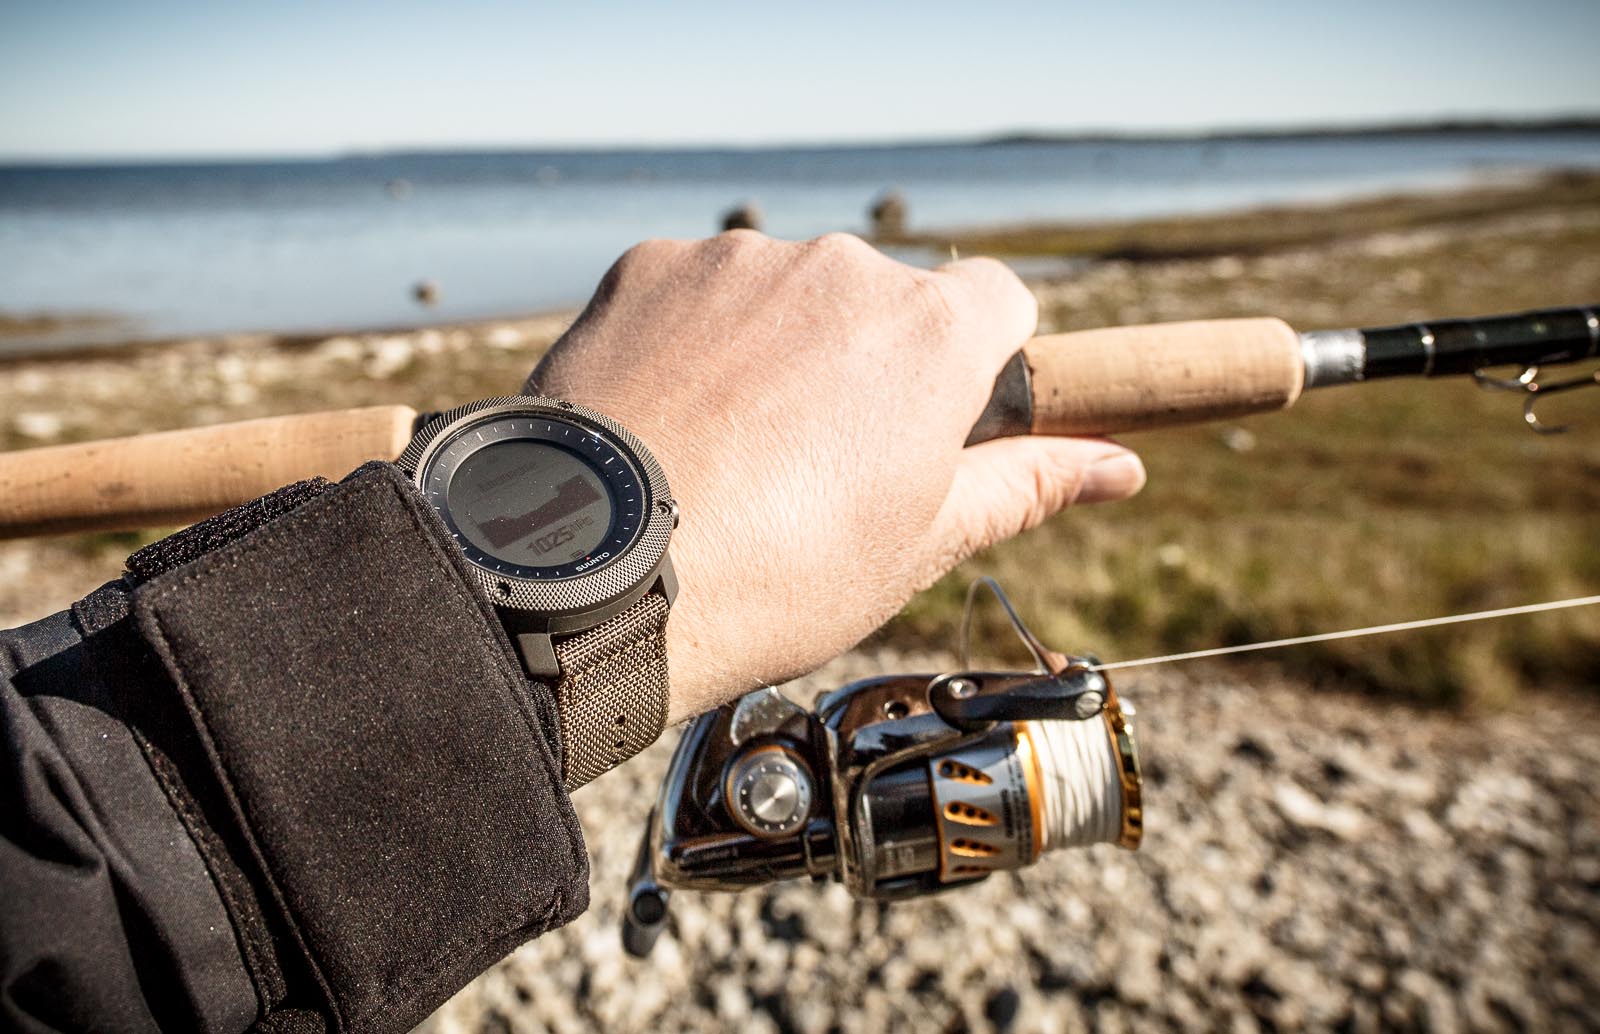 Suunto Traverse Alpha Foliage in use live picture fishing watch best fishing watch